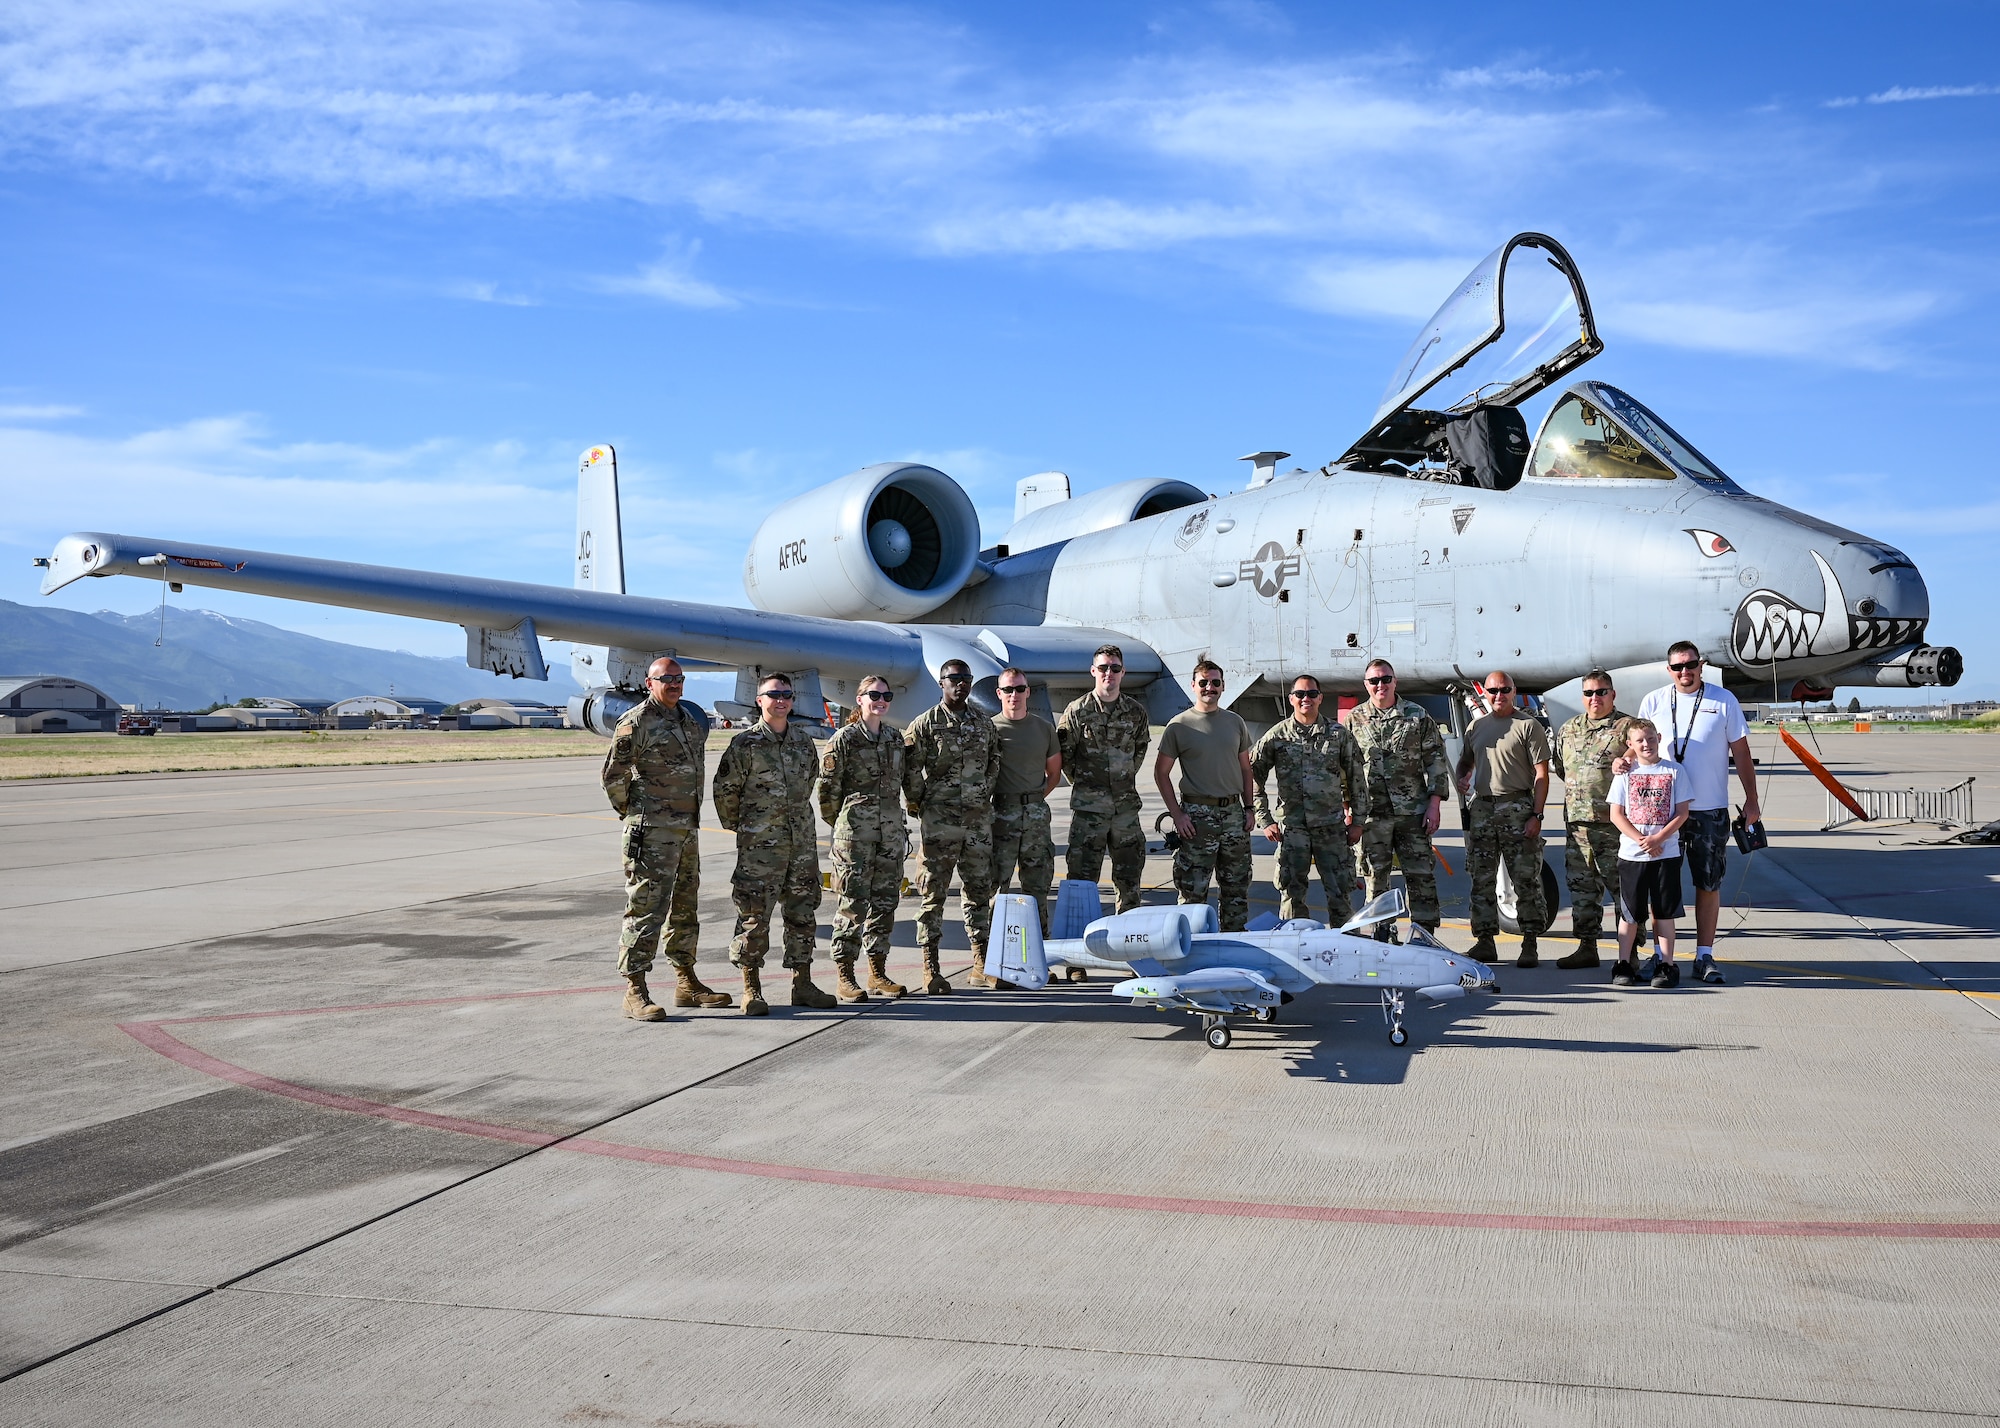 Members of the 442d Fighter Wing are photographed with a remote controlled A-10 Thunderbolt II and its owner at Hill Air Force Base, Utah, June 10, 2022. The RC plane has made appearances at air shows and RC events in Utah, California and Arizona. (U.S. Air Force photo by Tech. Sgt. Missy Sterling)